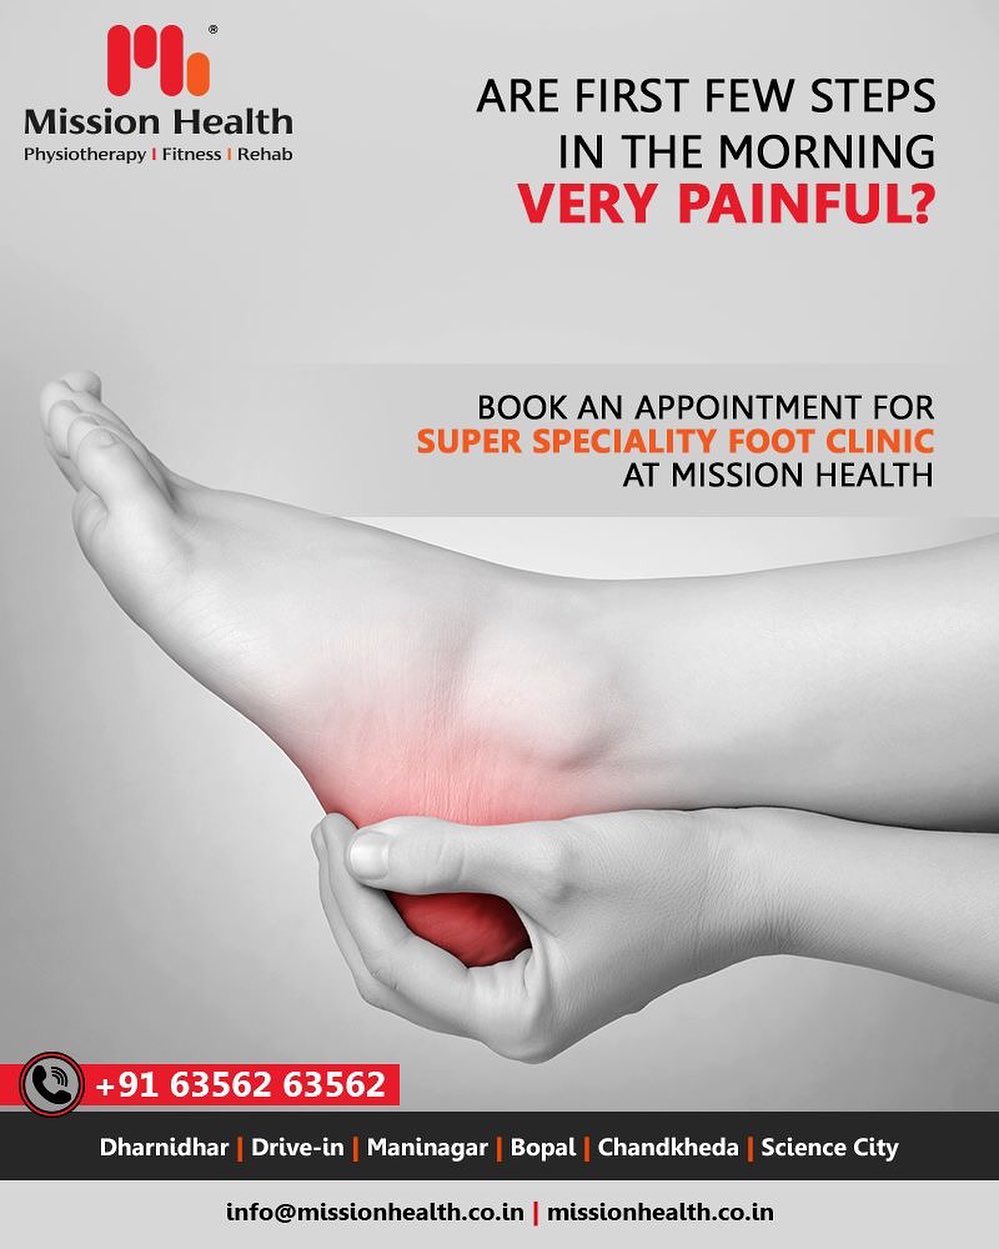 The Mission Health Foot Clinic strives to eliminate the root cause rather than symptoms of any foot pain, injury or deviations. 
FOOT CLINIC helps reduce pain with the help of advanced Non-Surgical Pain Technologies, Muscle Re-education Exercises, and Biomechanical Footwear Modifications.

Call: +916356263562
Visit: www.missionhealth.co.in 
#footclinic #footcare #footdoctor #footpain #feet #heelpain #MissionHealth #MissionHealthIndia #MovementIsLife